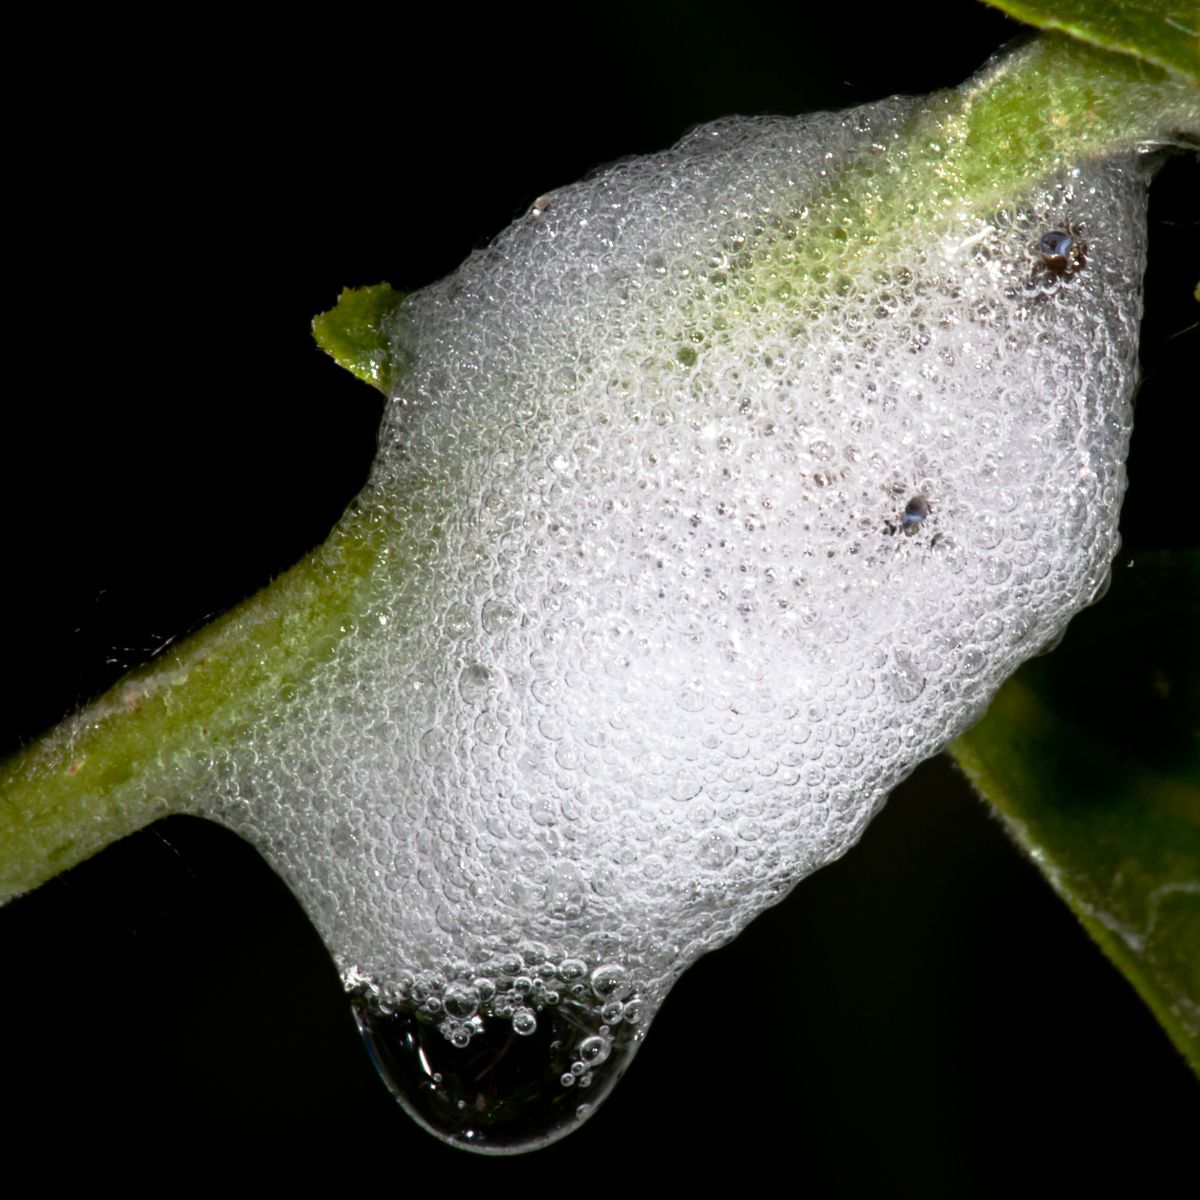 spit-like foam on a plant made by spittlebugs.